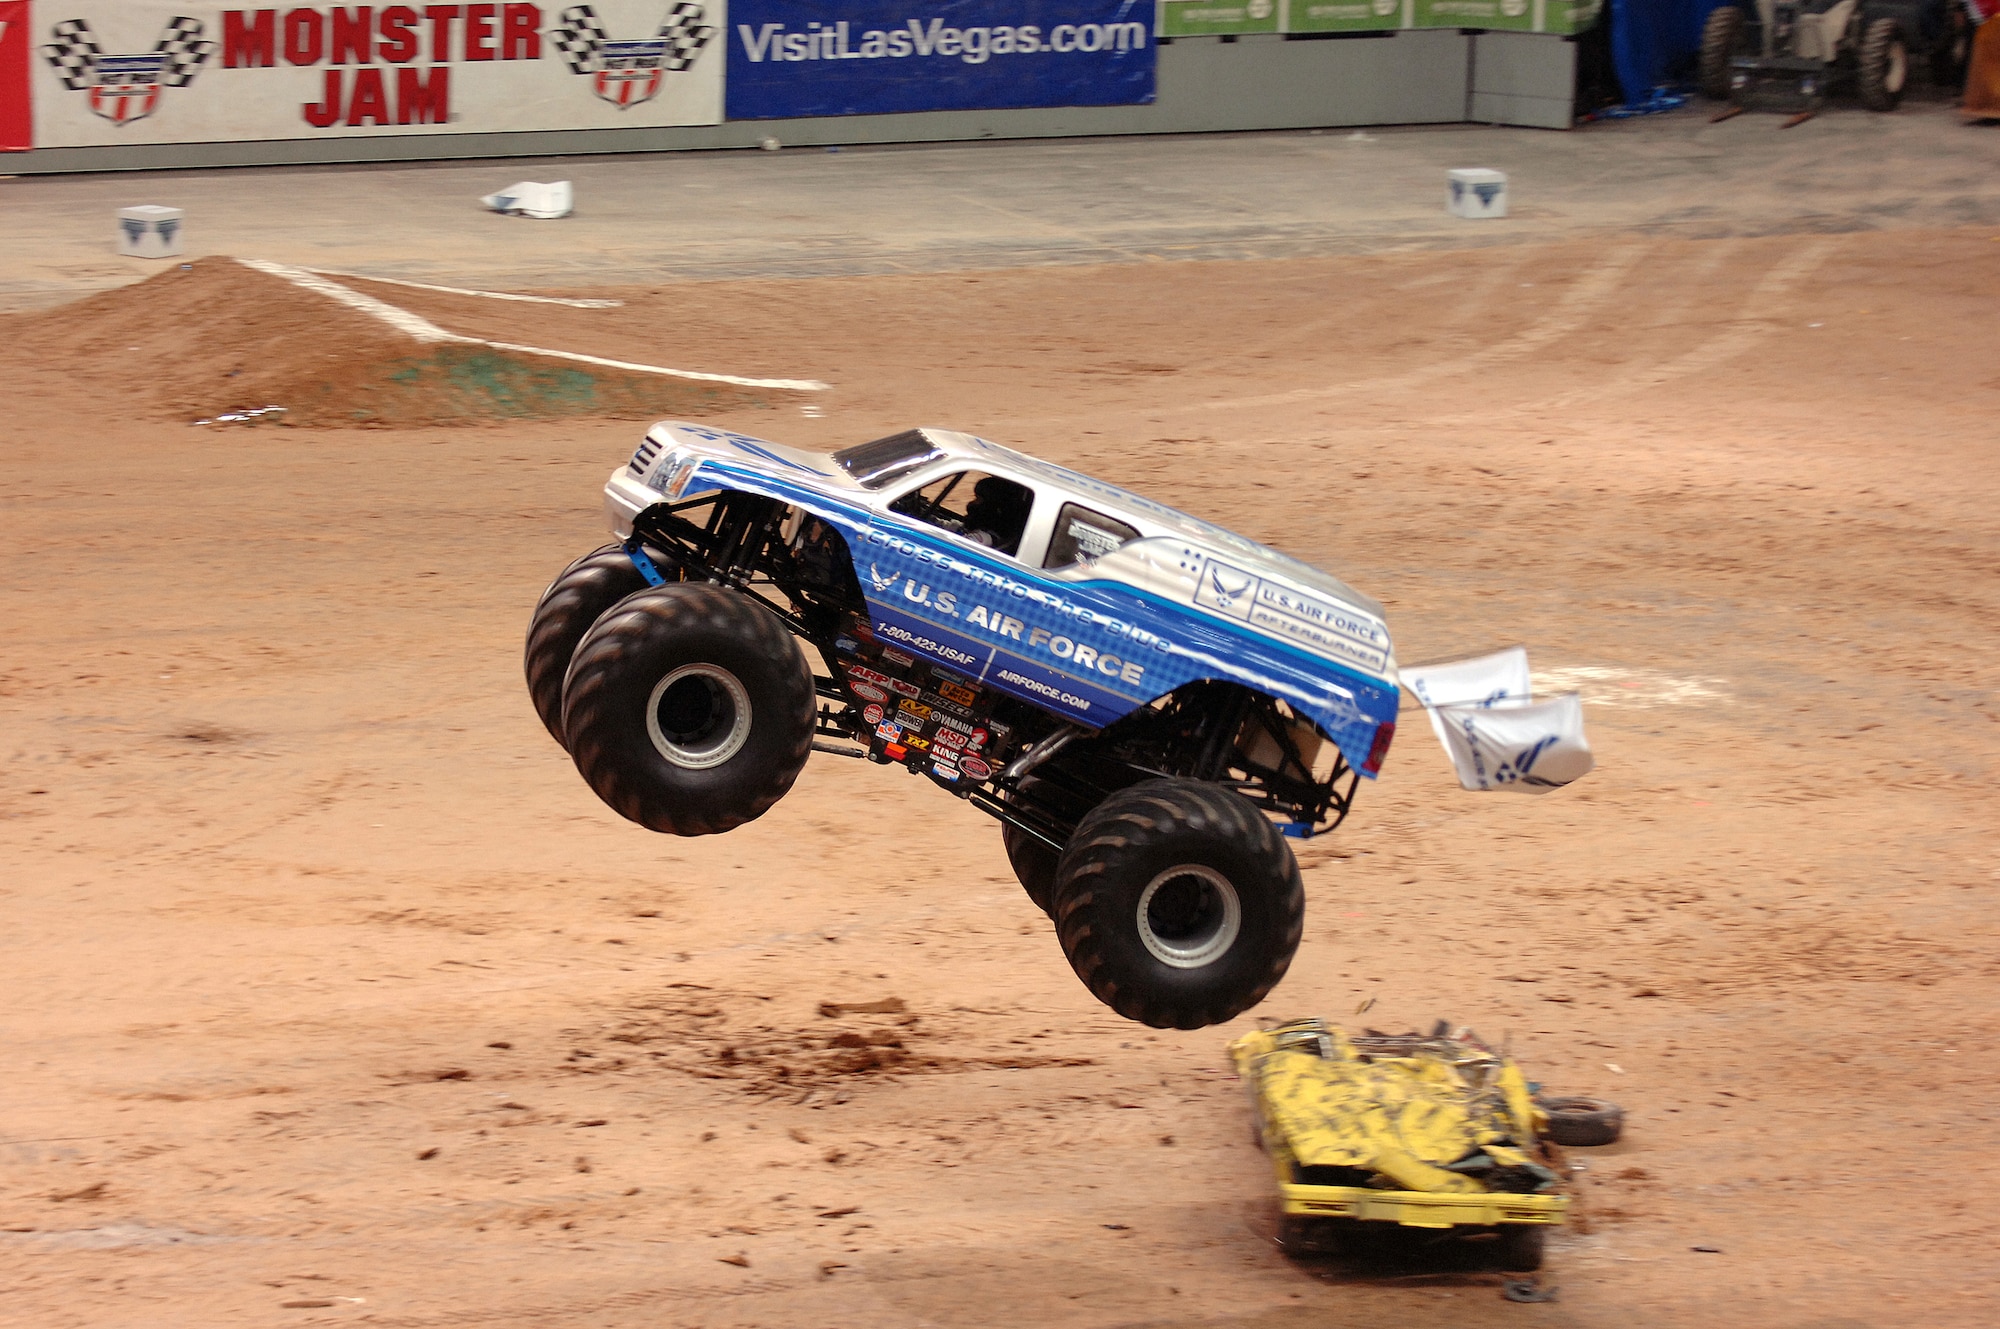 The Air Force sponsored monster truck Afterburner, driven by Damon Bradshaw, goes airborne over an obstacle during the free style round of the 2007 Monster Jam in San Antonio, Texas. (US Air Force photo/Master Sgt. Scott Reed)